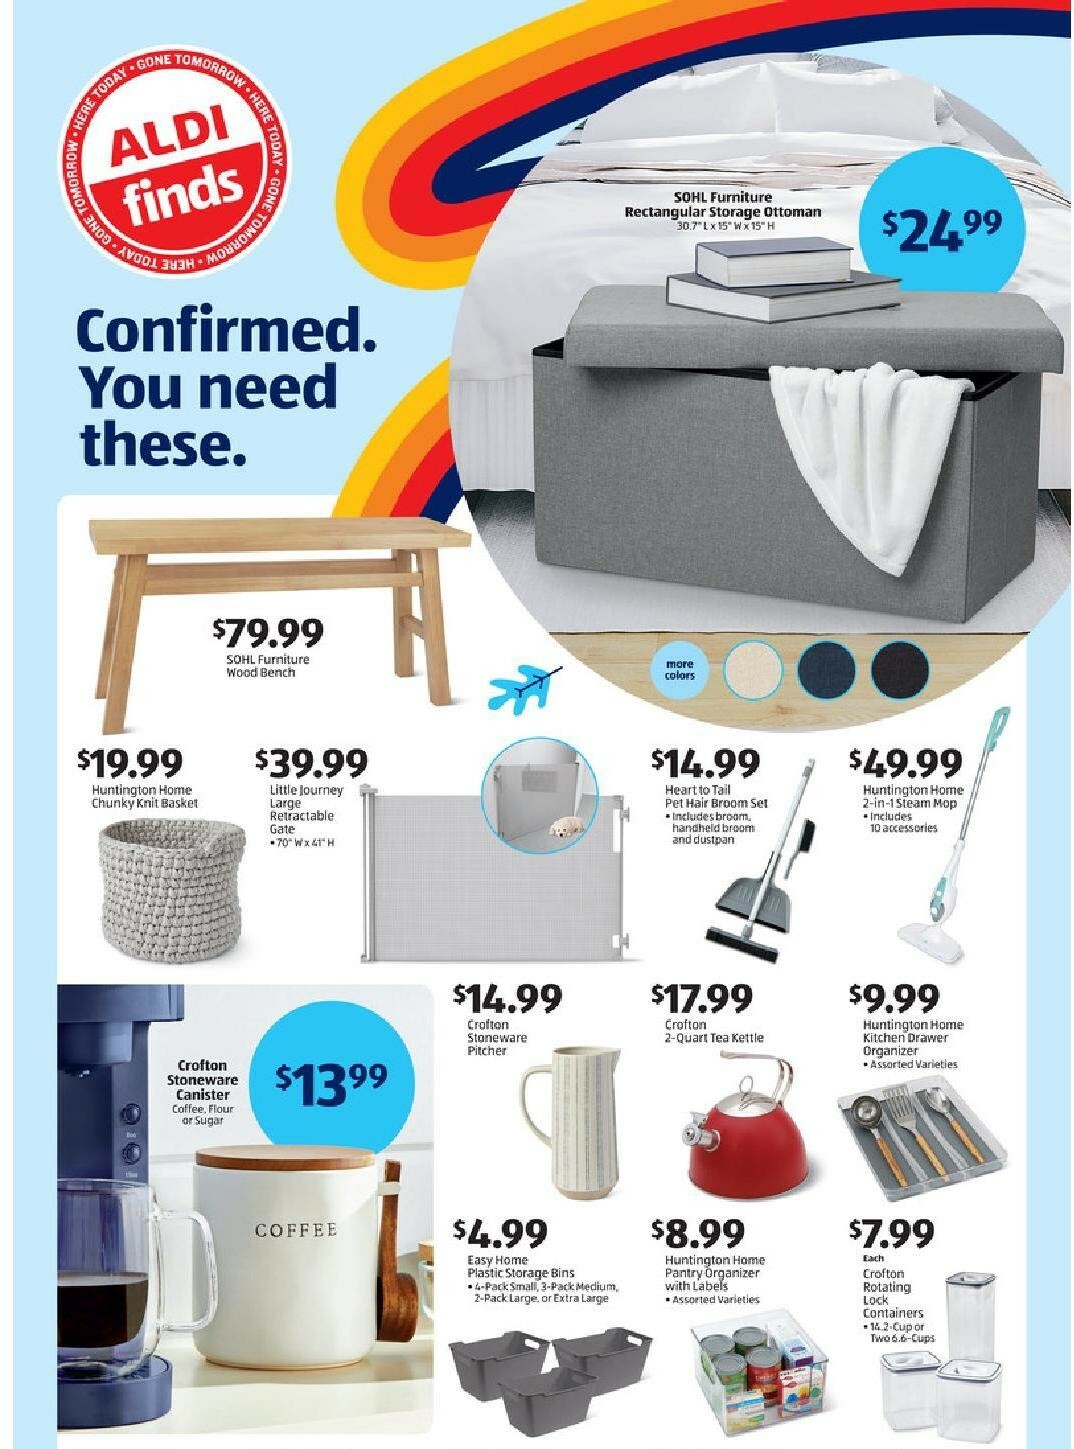 ALDI Weekly Ad from October 23